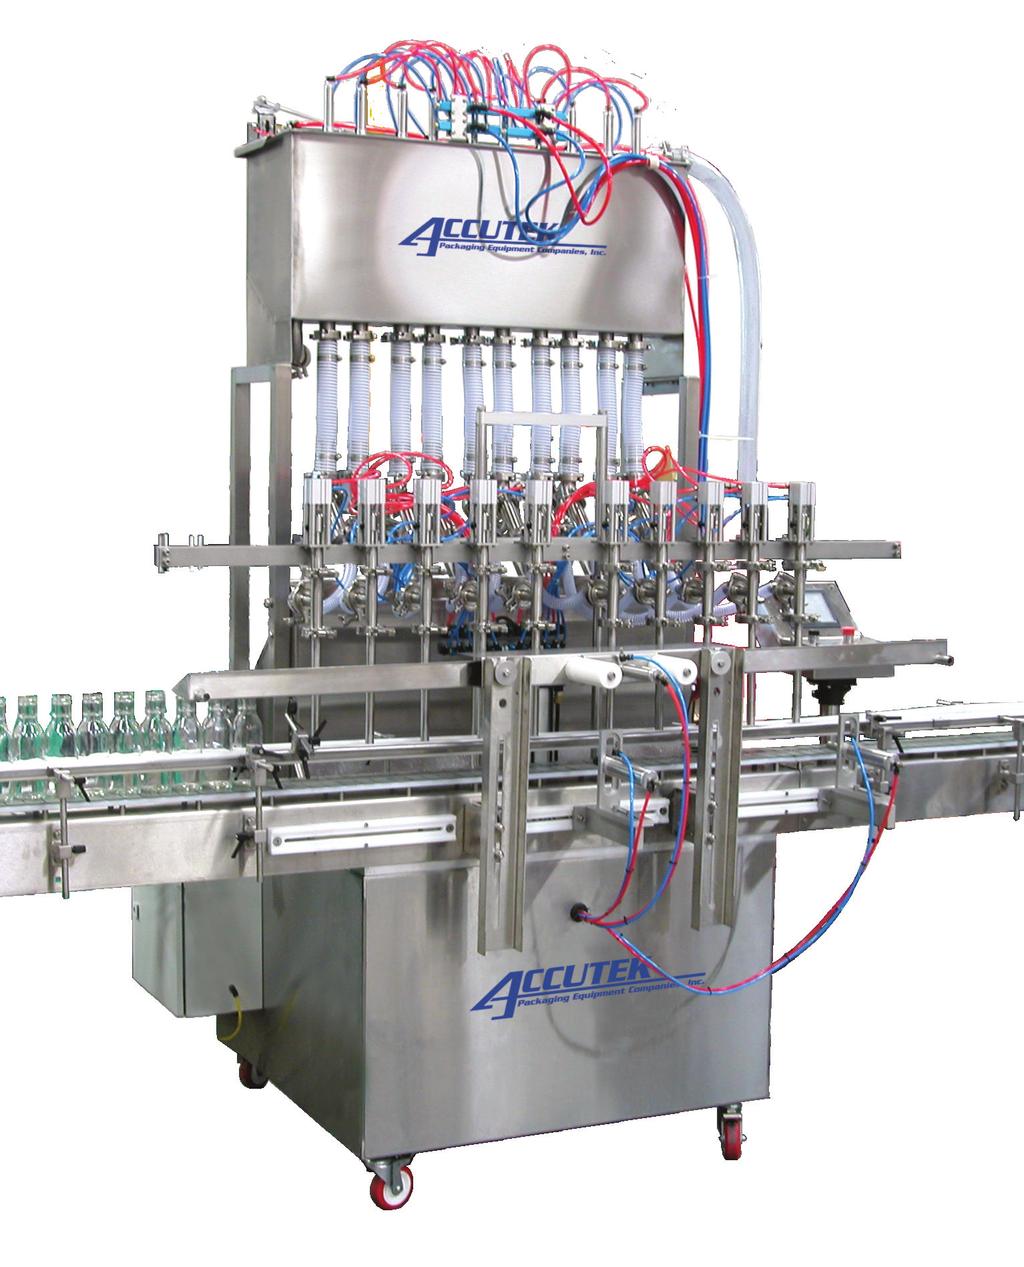 AVF Series Automatic Piston Filling Machines Key Features: Two to twelve head filler configuration (8-128 oz. cylinders) Food grade stainless steel constructed A.B.I.